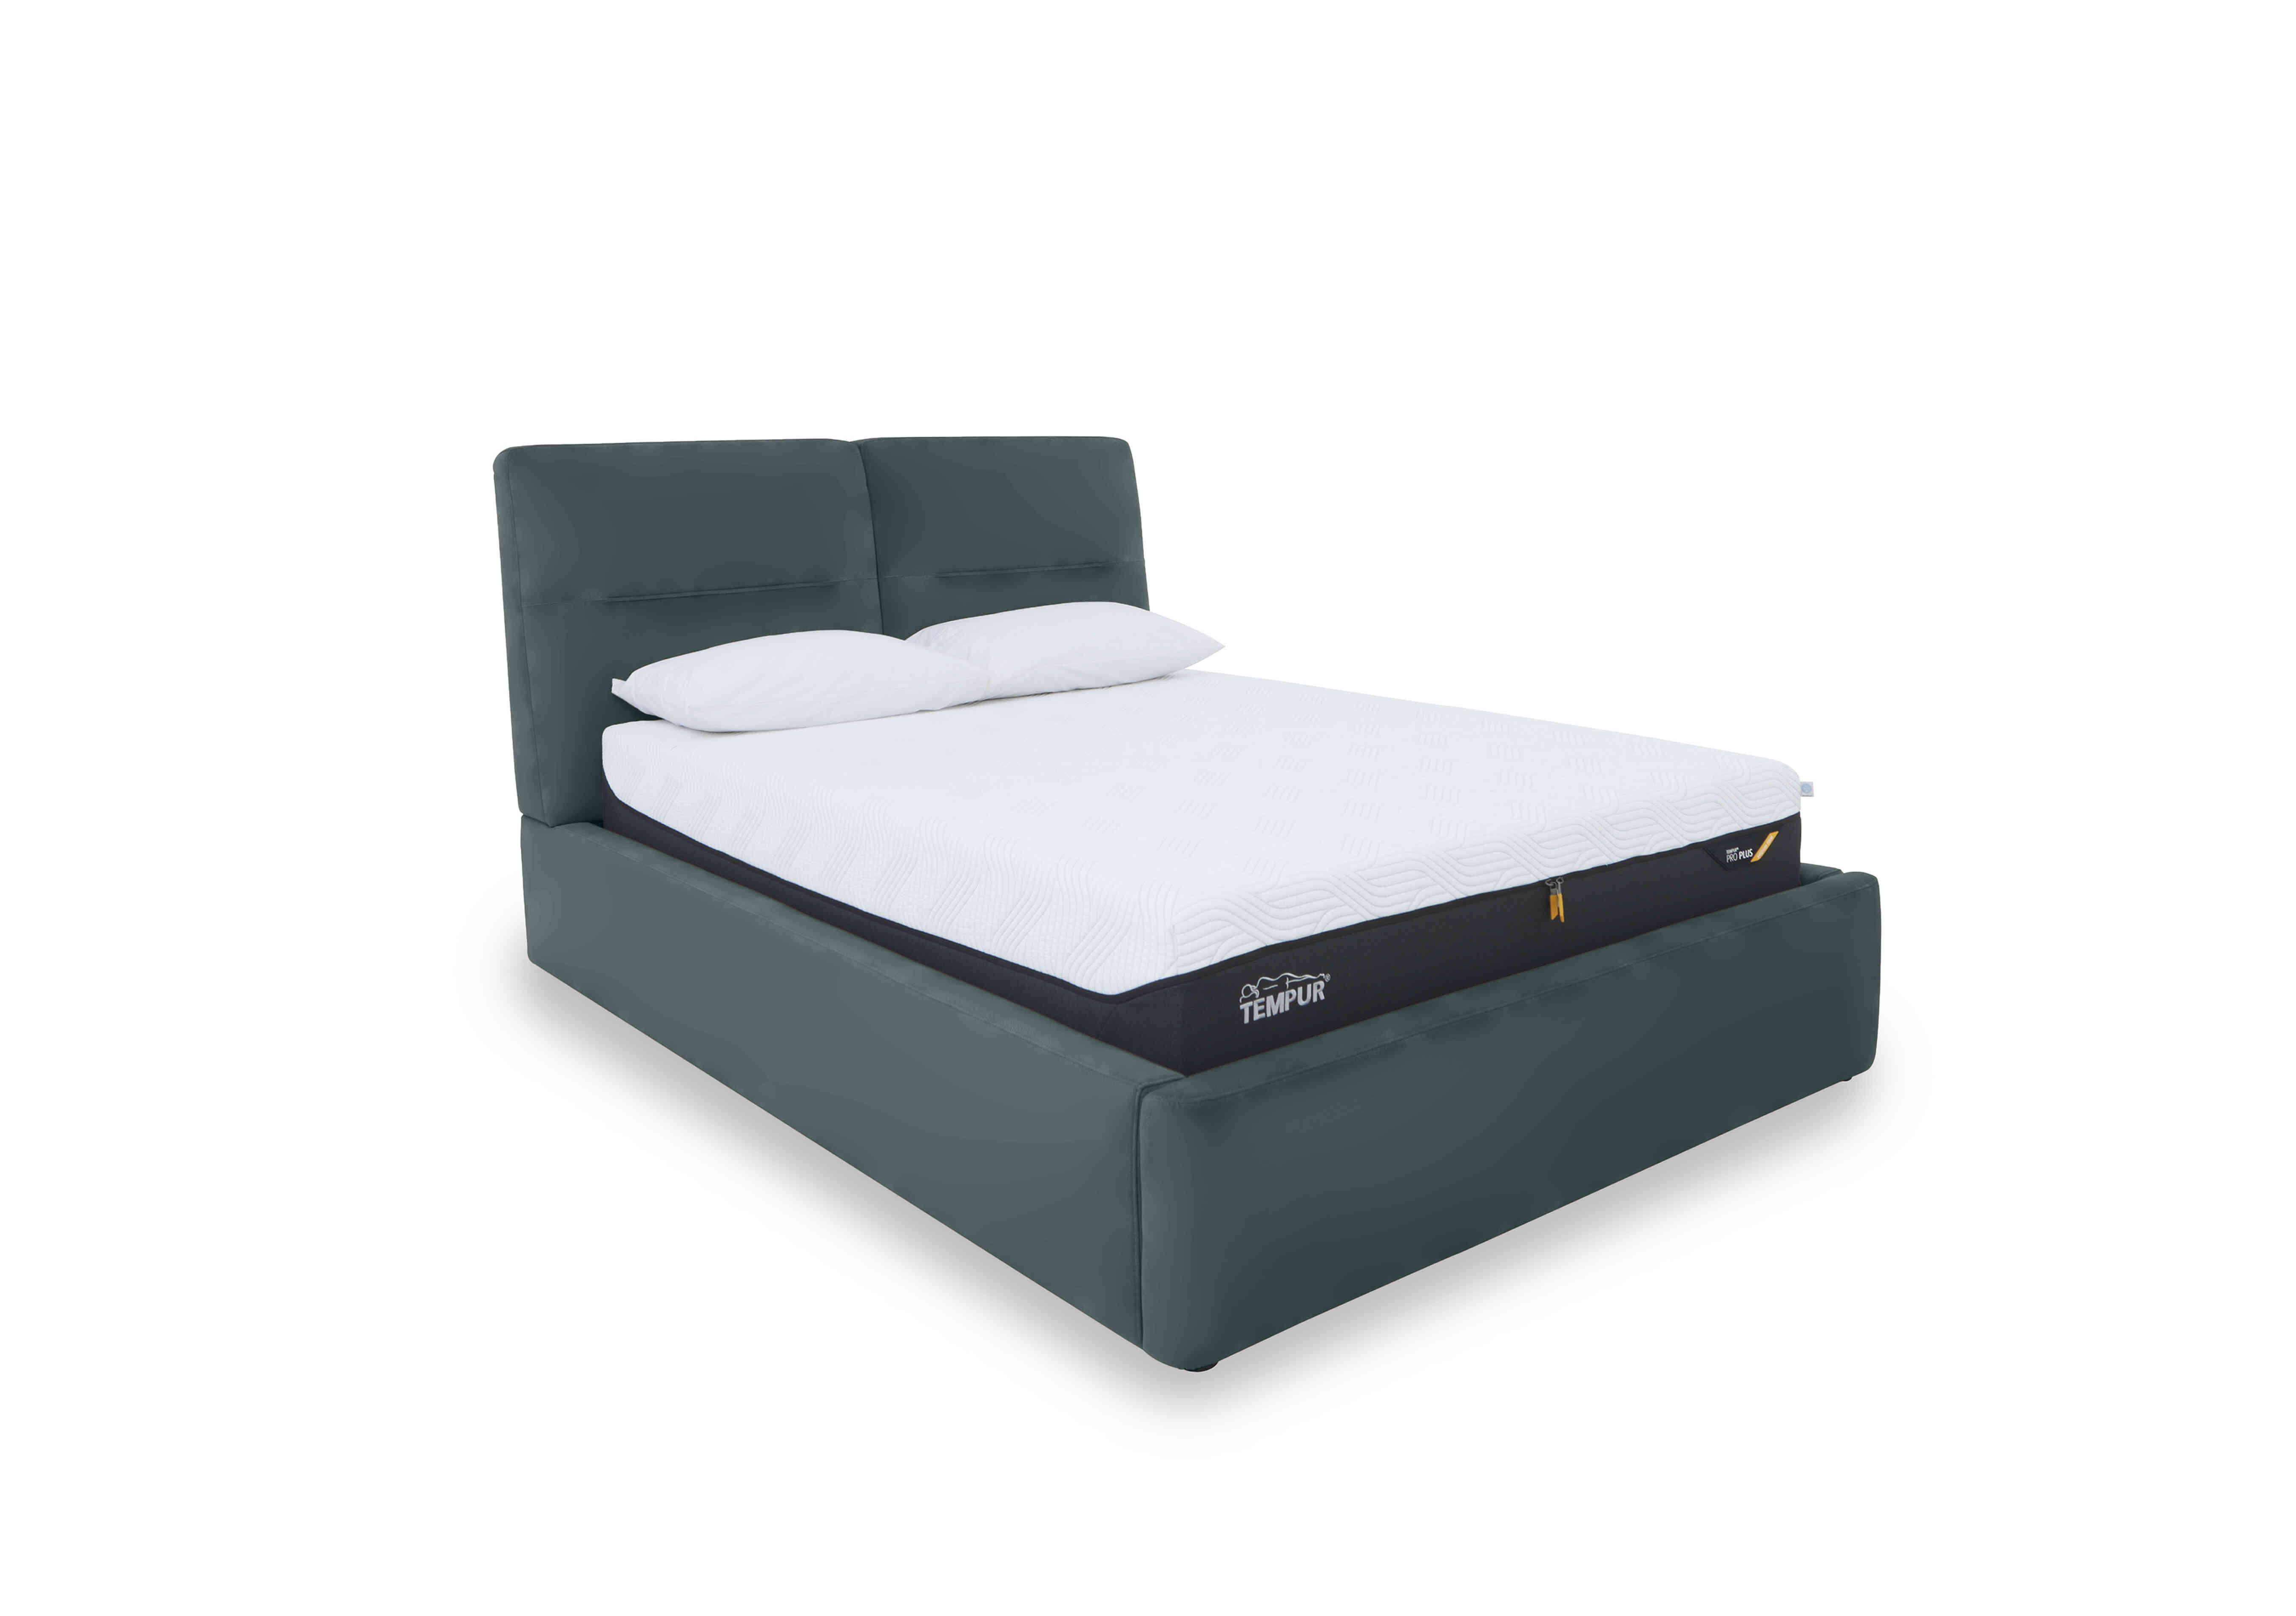 Stark Leather Manual Ottoman Bed Frame in Bv-301e Lake Green on Furniture Village